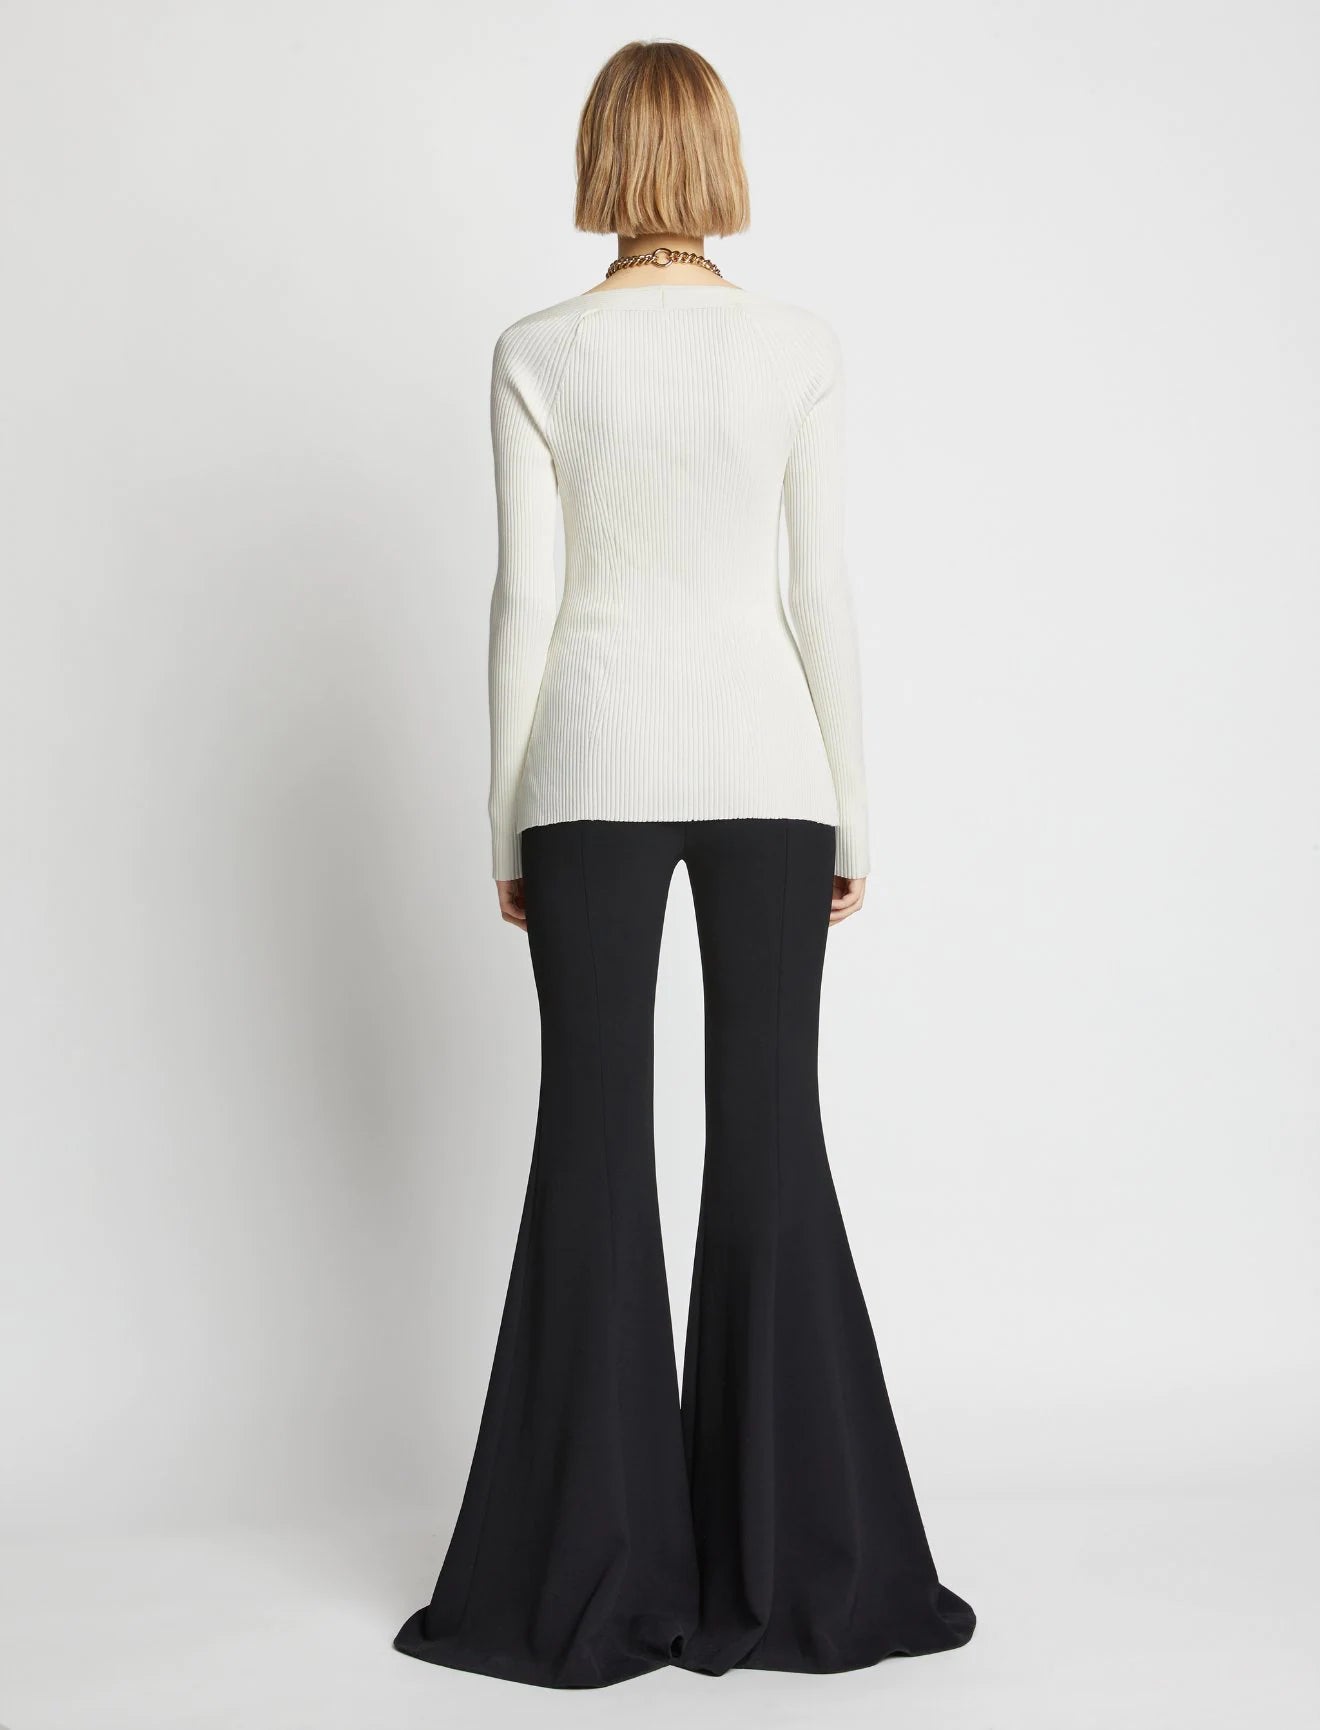 Clean Viscose Knit Top - Off-white